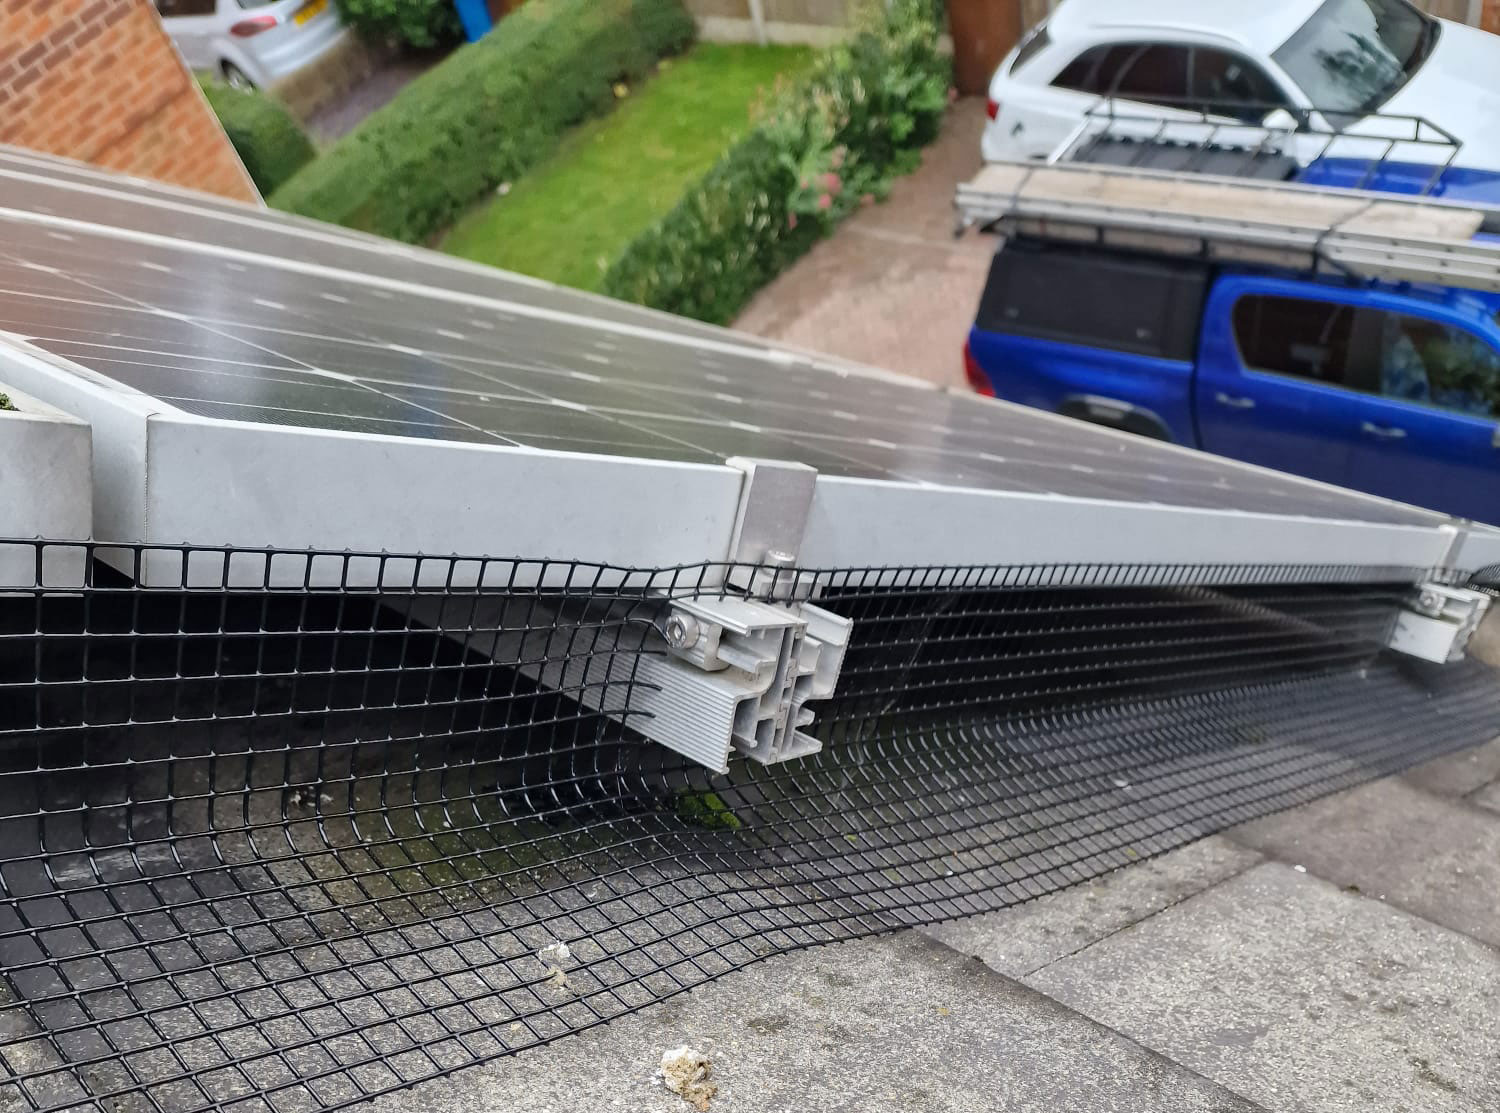 Protecting Solar Panels from Pigeons in Sandiacre